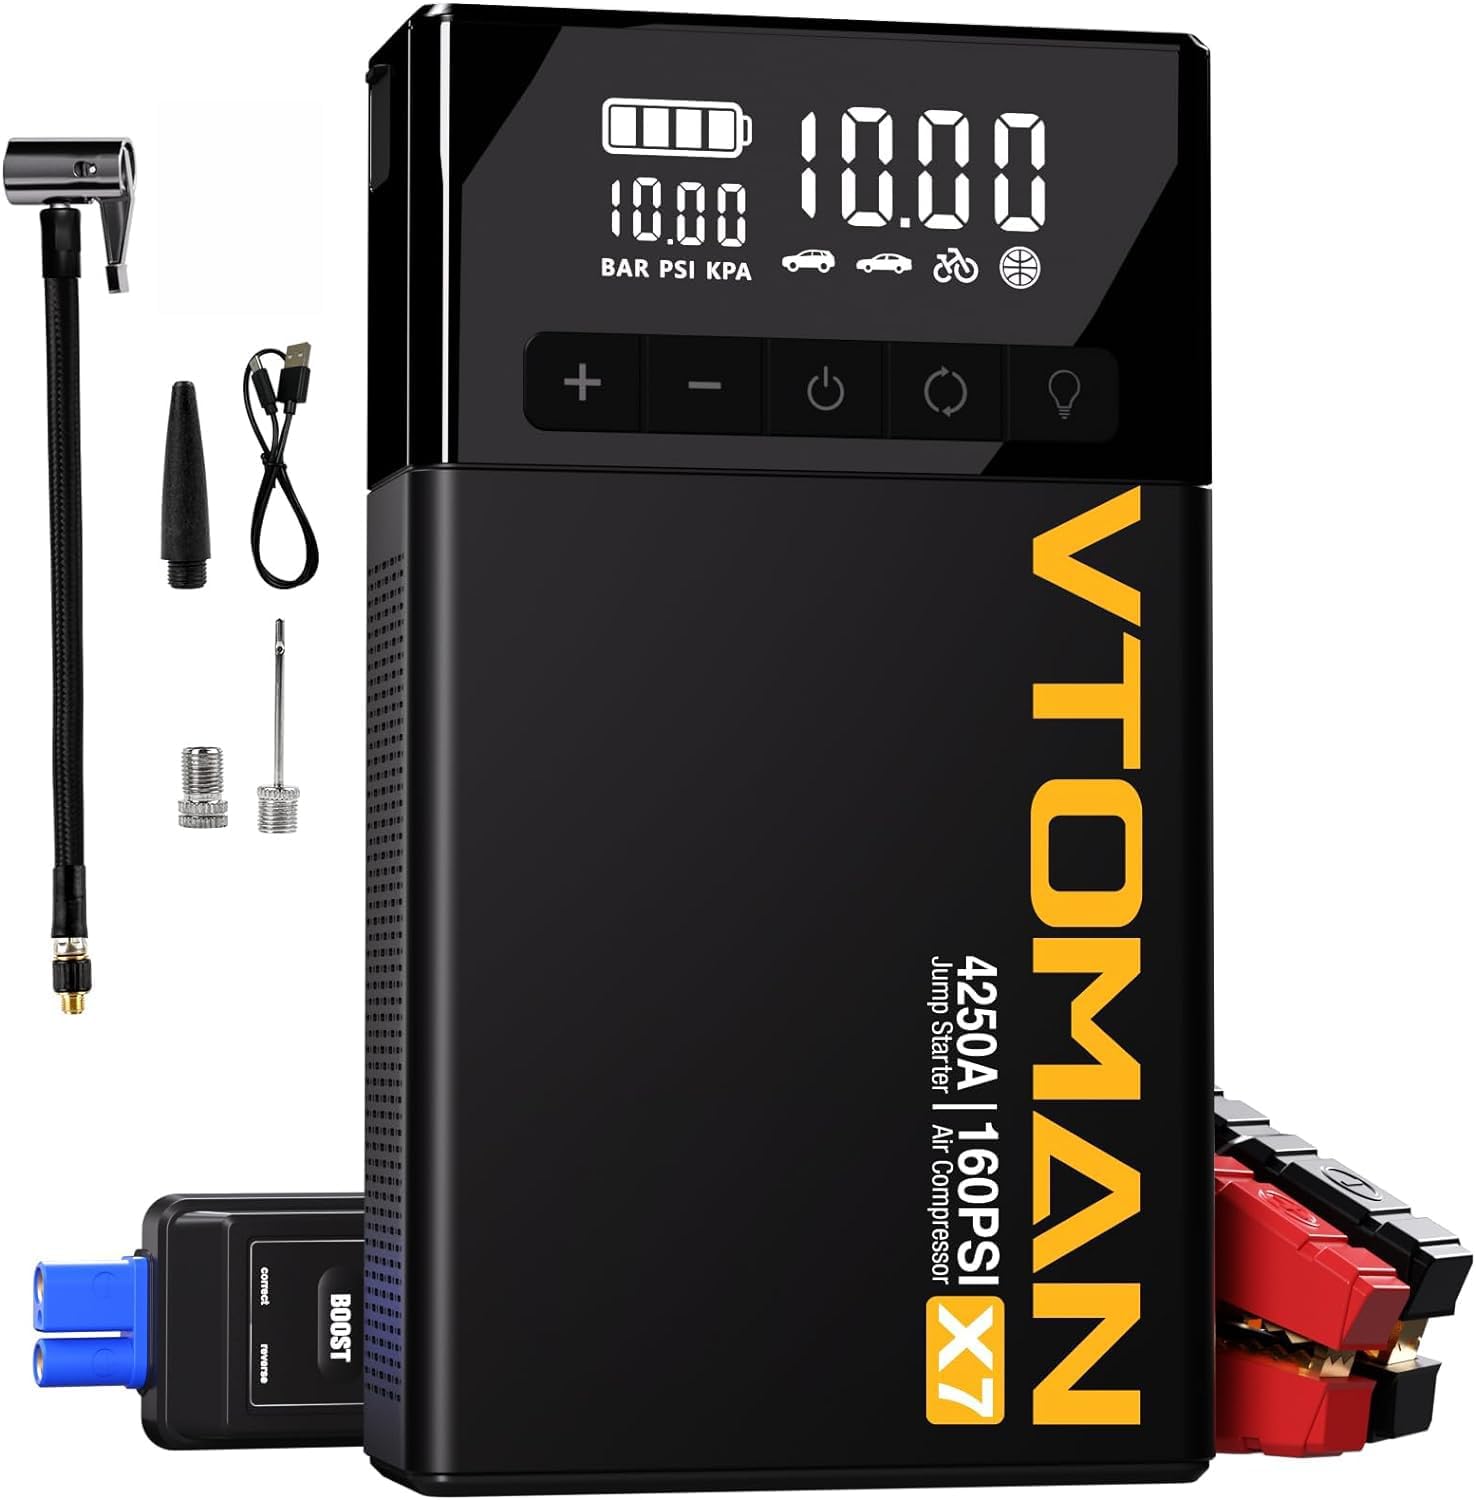 NOCO Boost Pro GB150 3000A Jump-Starter for $299.95 VToman X7 Jump-Starter with Air Compressor for $174.99 With Coupon